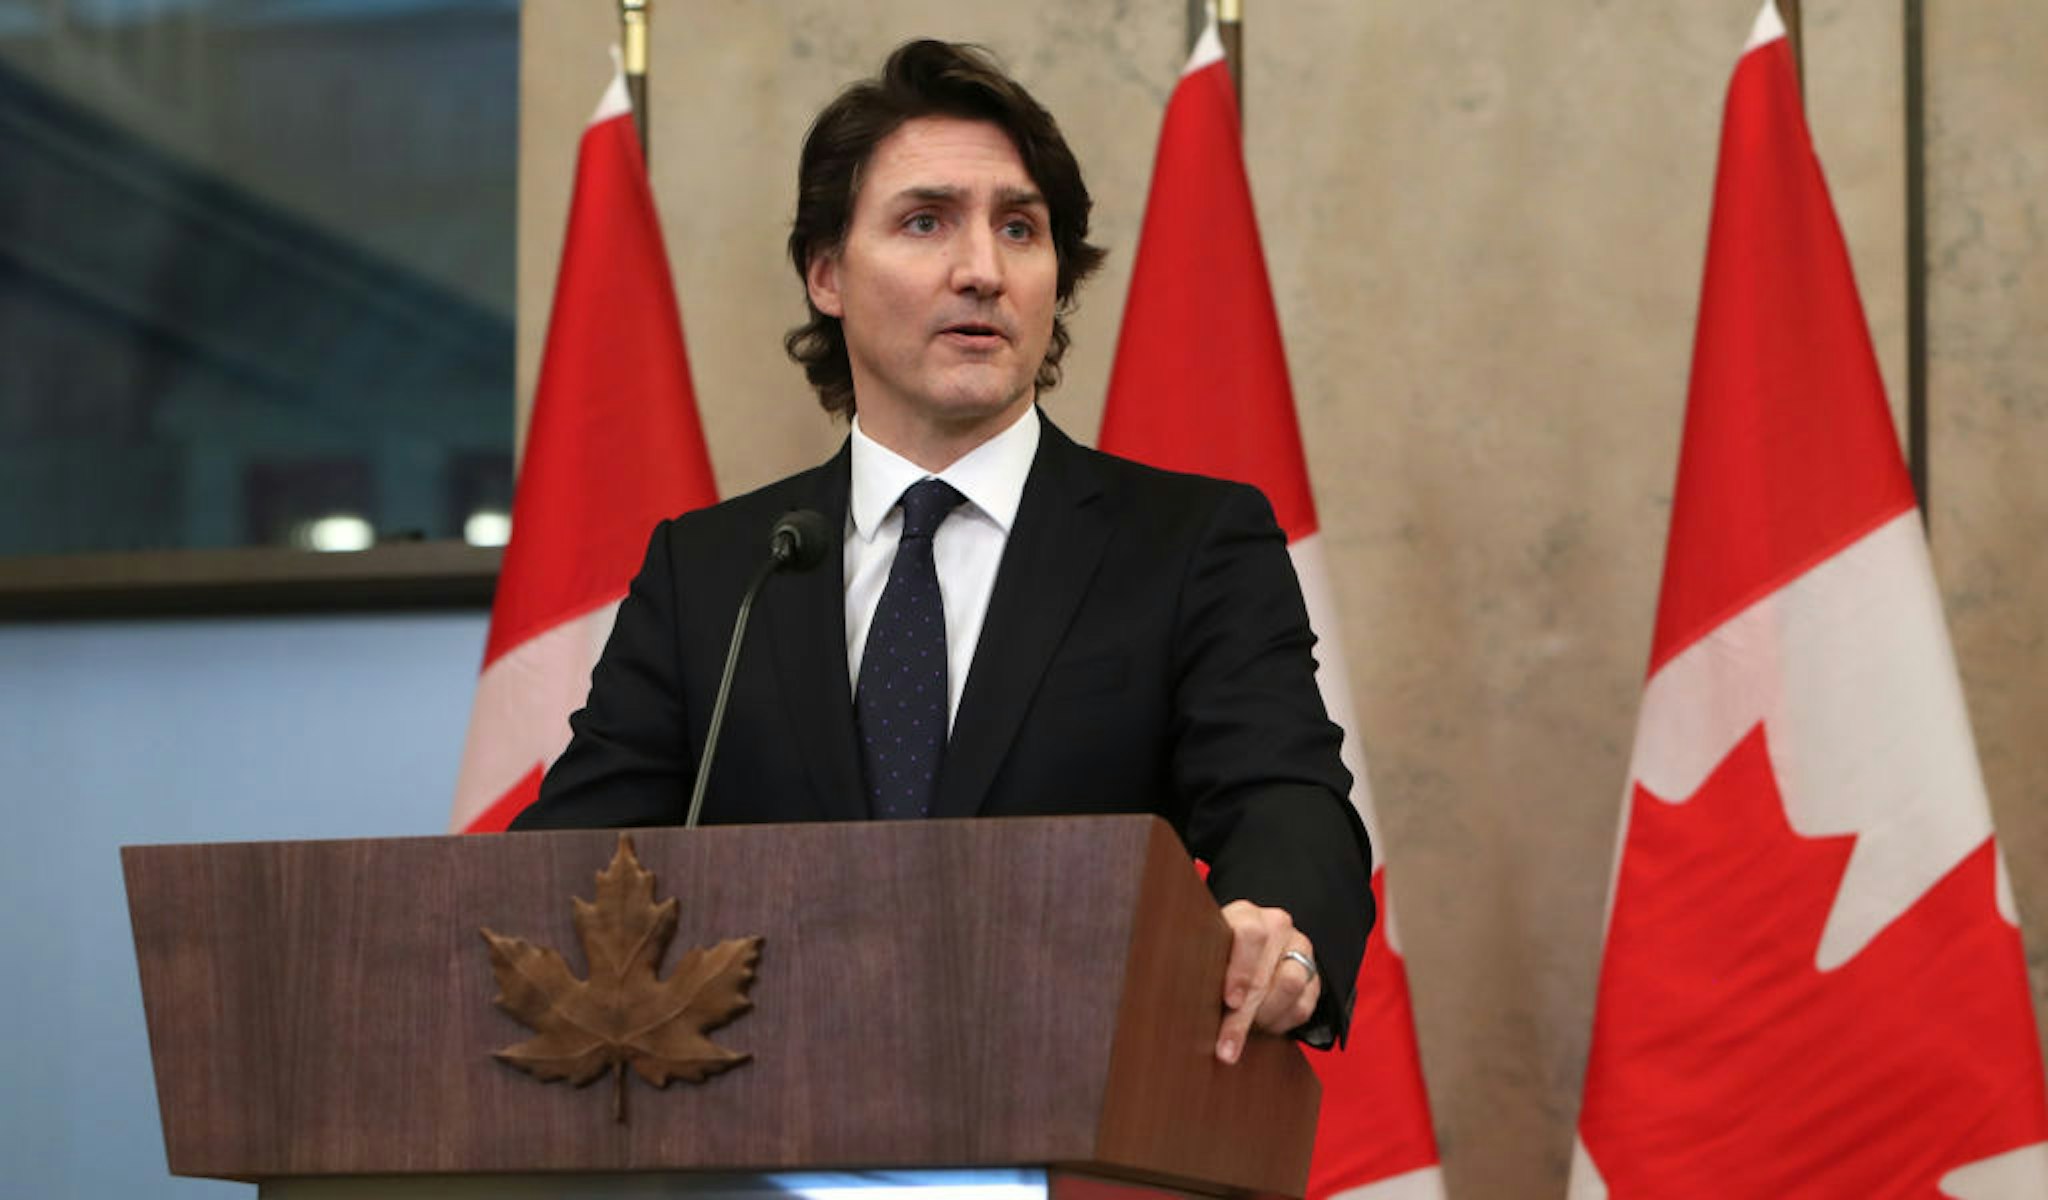 Justin Trudeau, Canada's prime minister, speaks during a news conference on Parliament Hill in Ottawa, Ontario, Canada, on Friday, Feb. 11, 2022. Trudeau warned that demonstrators will face "real consequences" if they continue blockades in Ottawa and at the U.S. border, while using more conciliatory language in an attempt to help defuse the situation. Photographer: David Kawai/Bloomberg via Getty Images